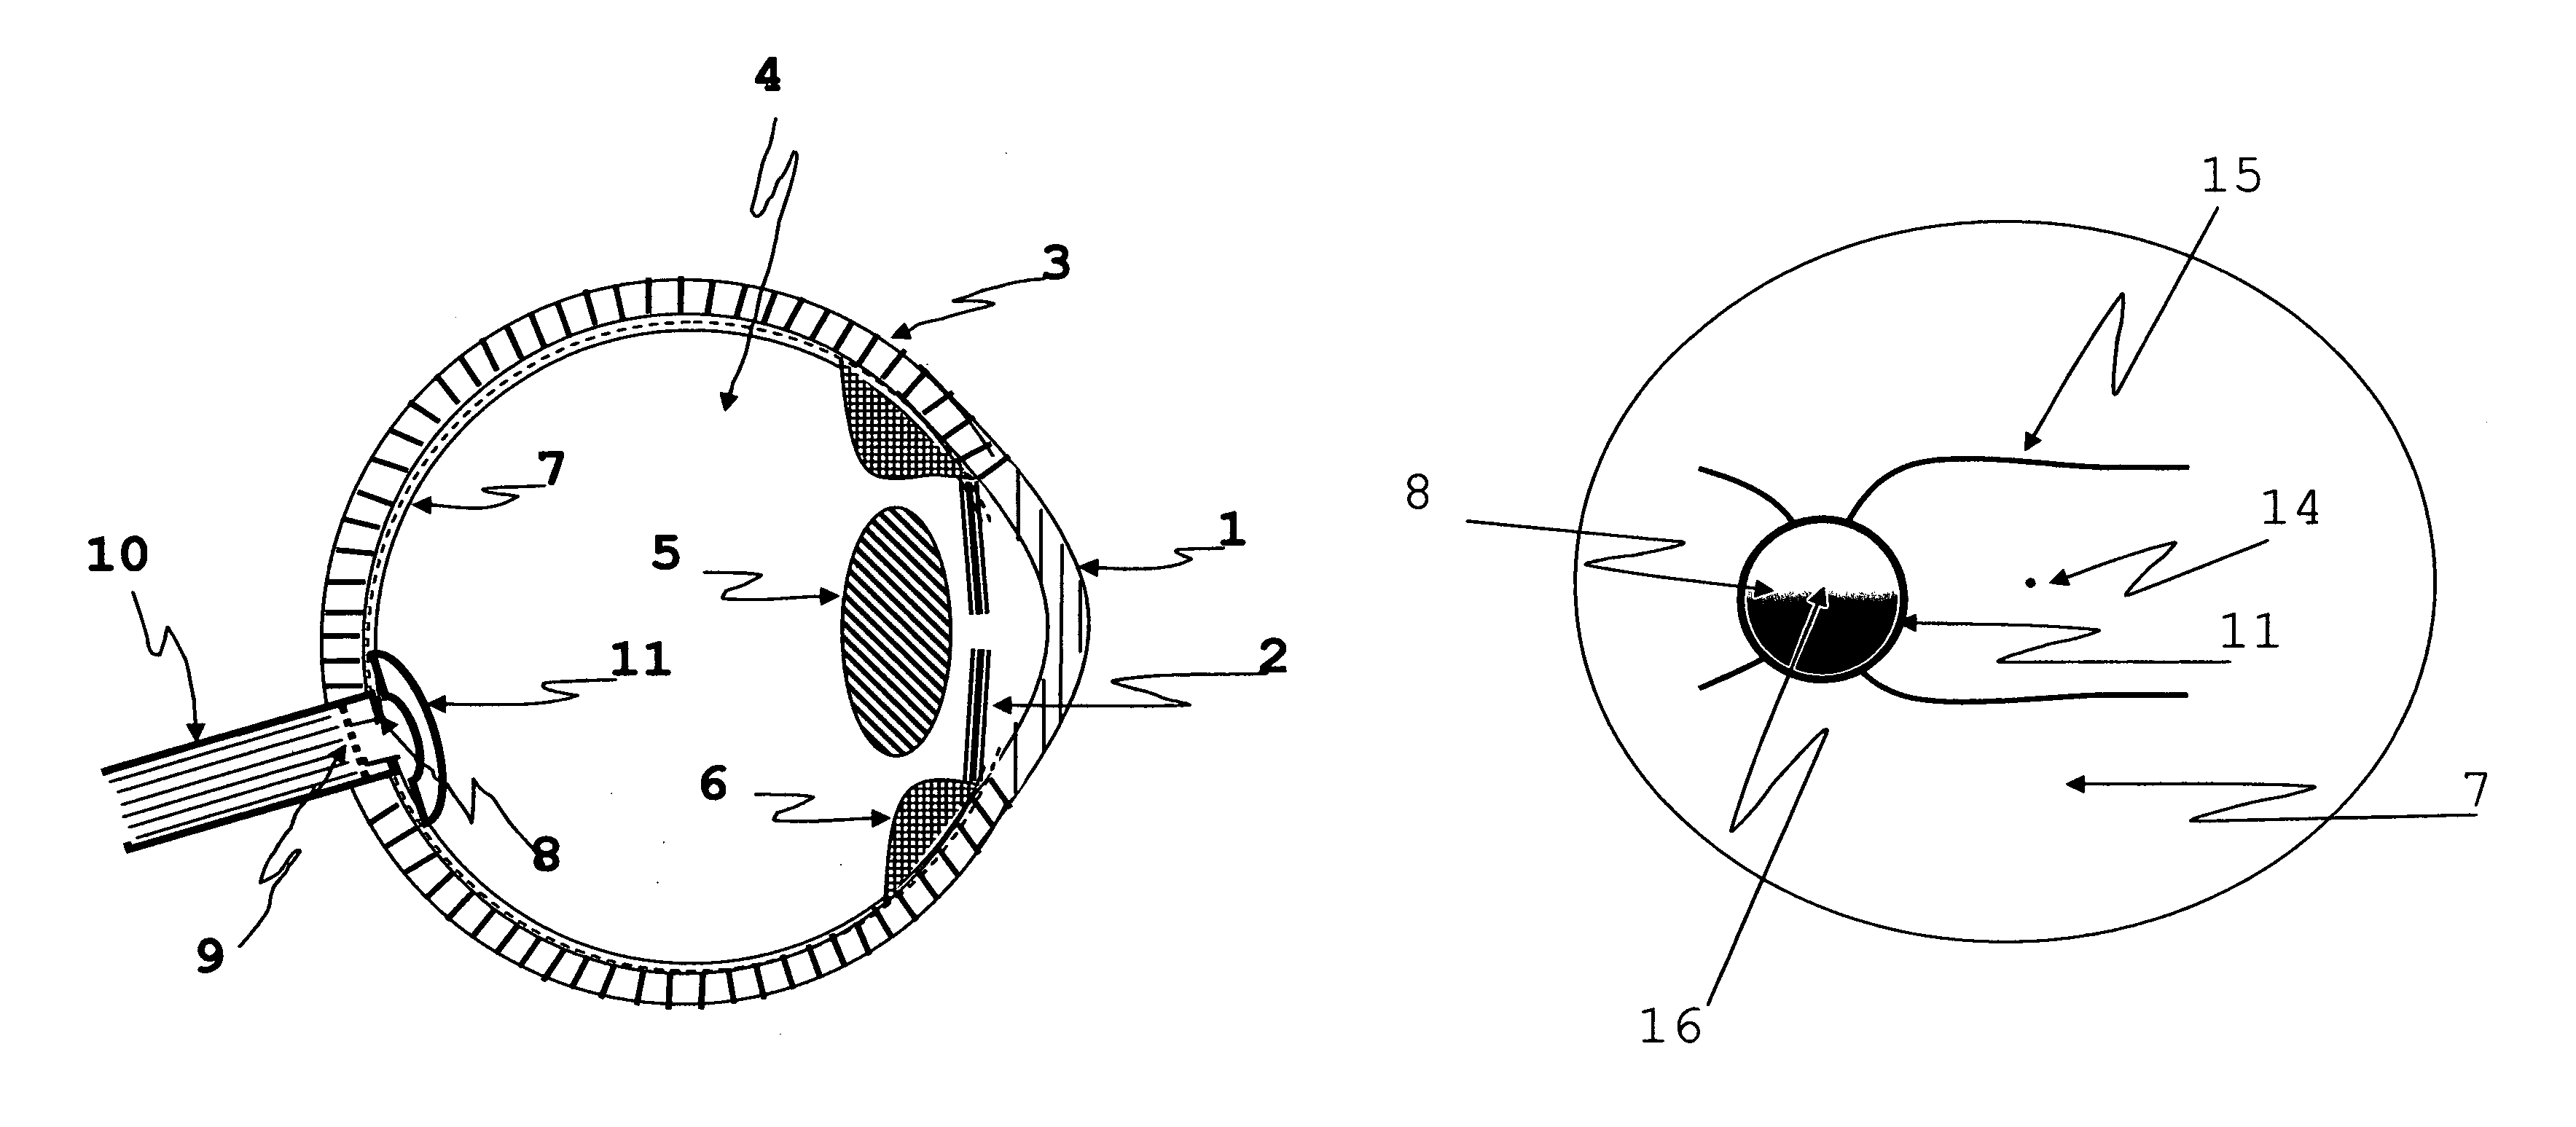 Apparatus and method for preventing glaucomatous optic neuropathy